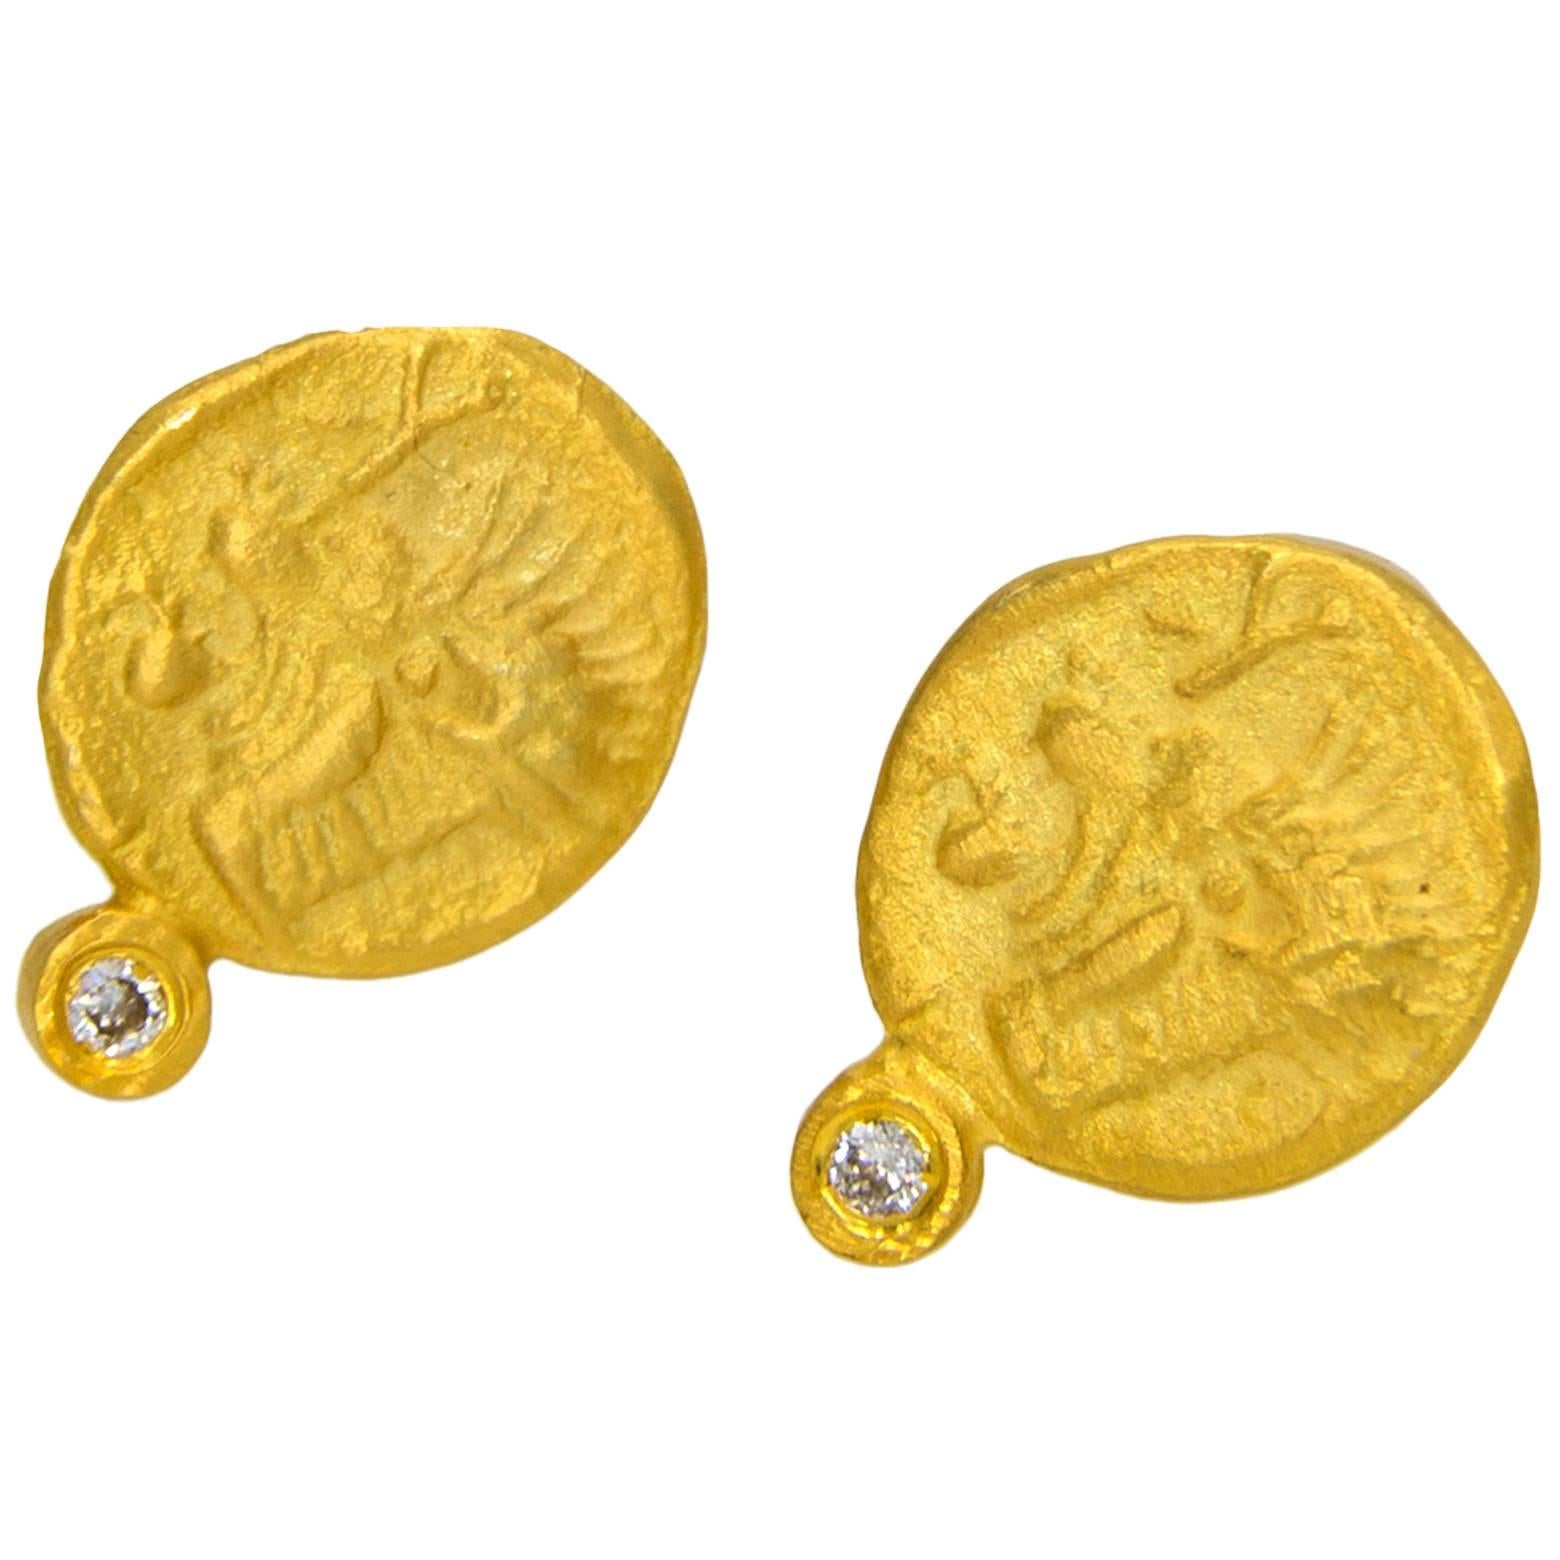 Diamond Gold Stamped Coin Mythical Creature Faces Stud Earrings